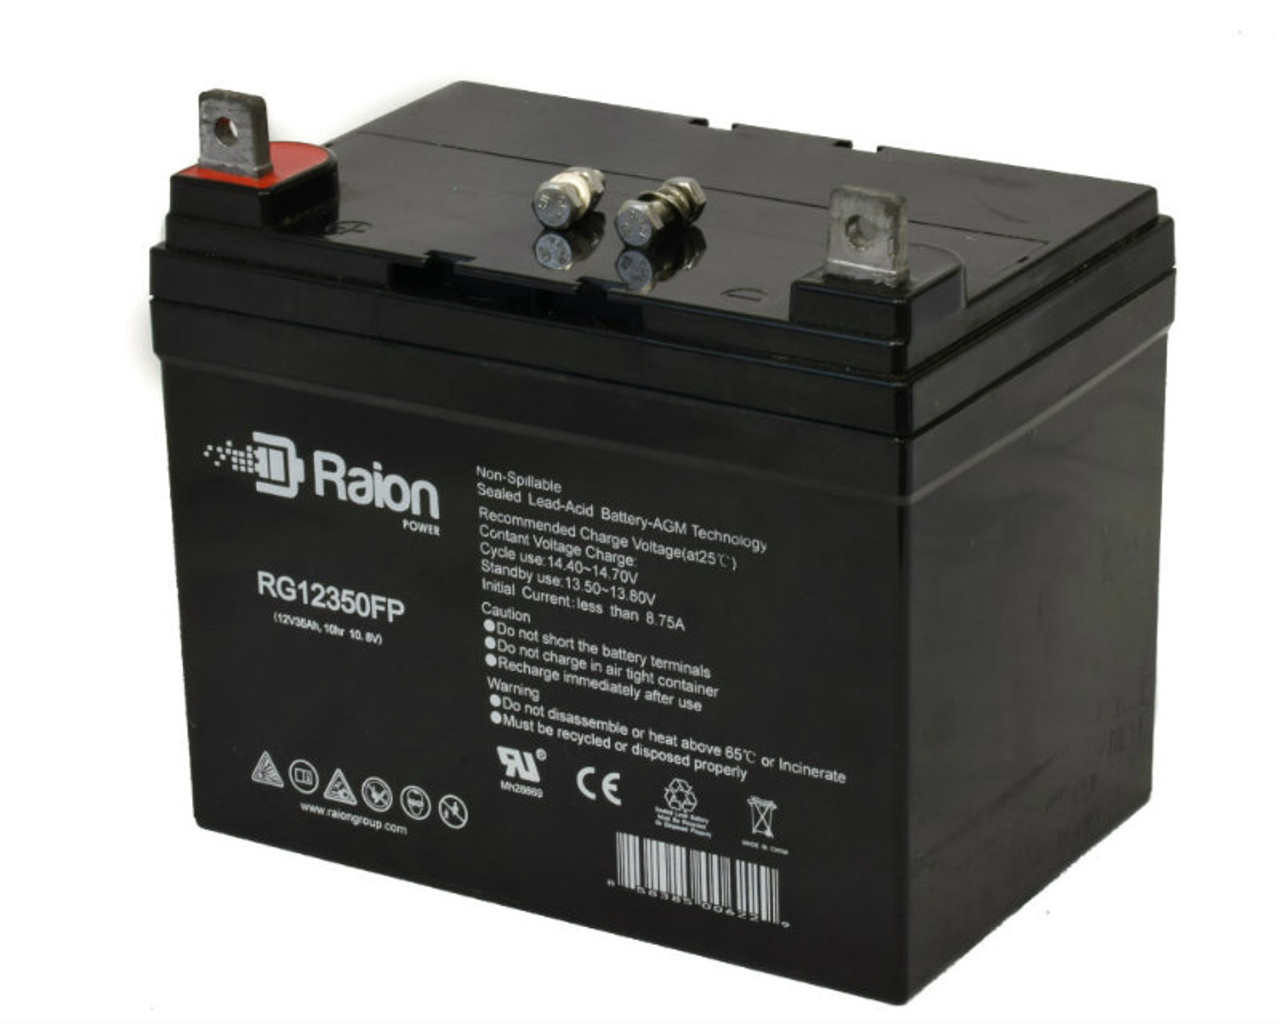 Raion Power Replacement 12V 35Ah RG12350FP Battery for JC Penney 931-2703